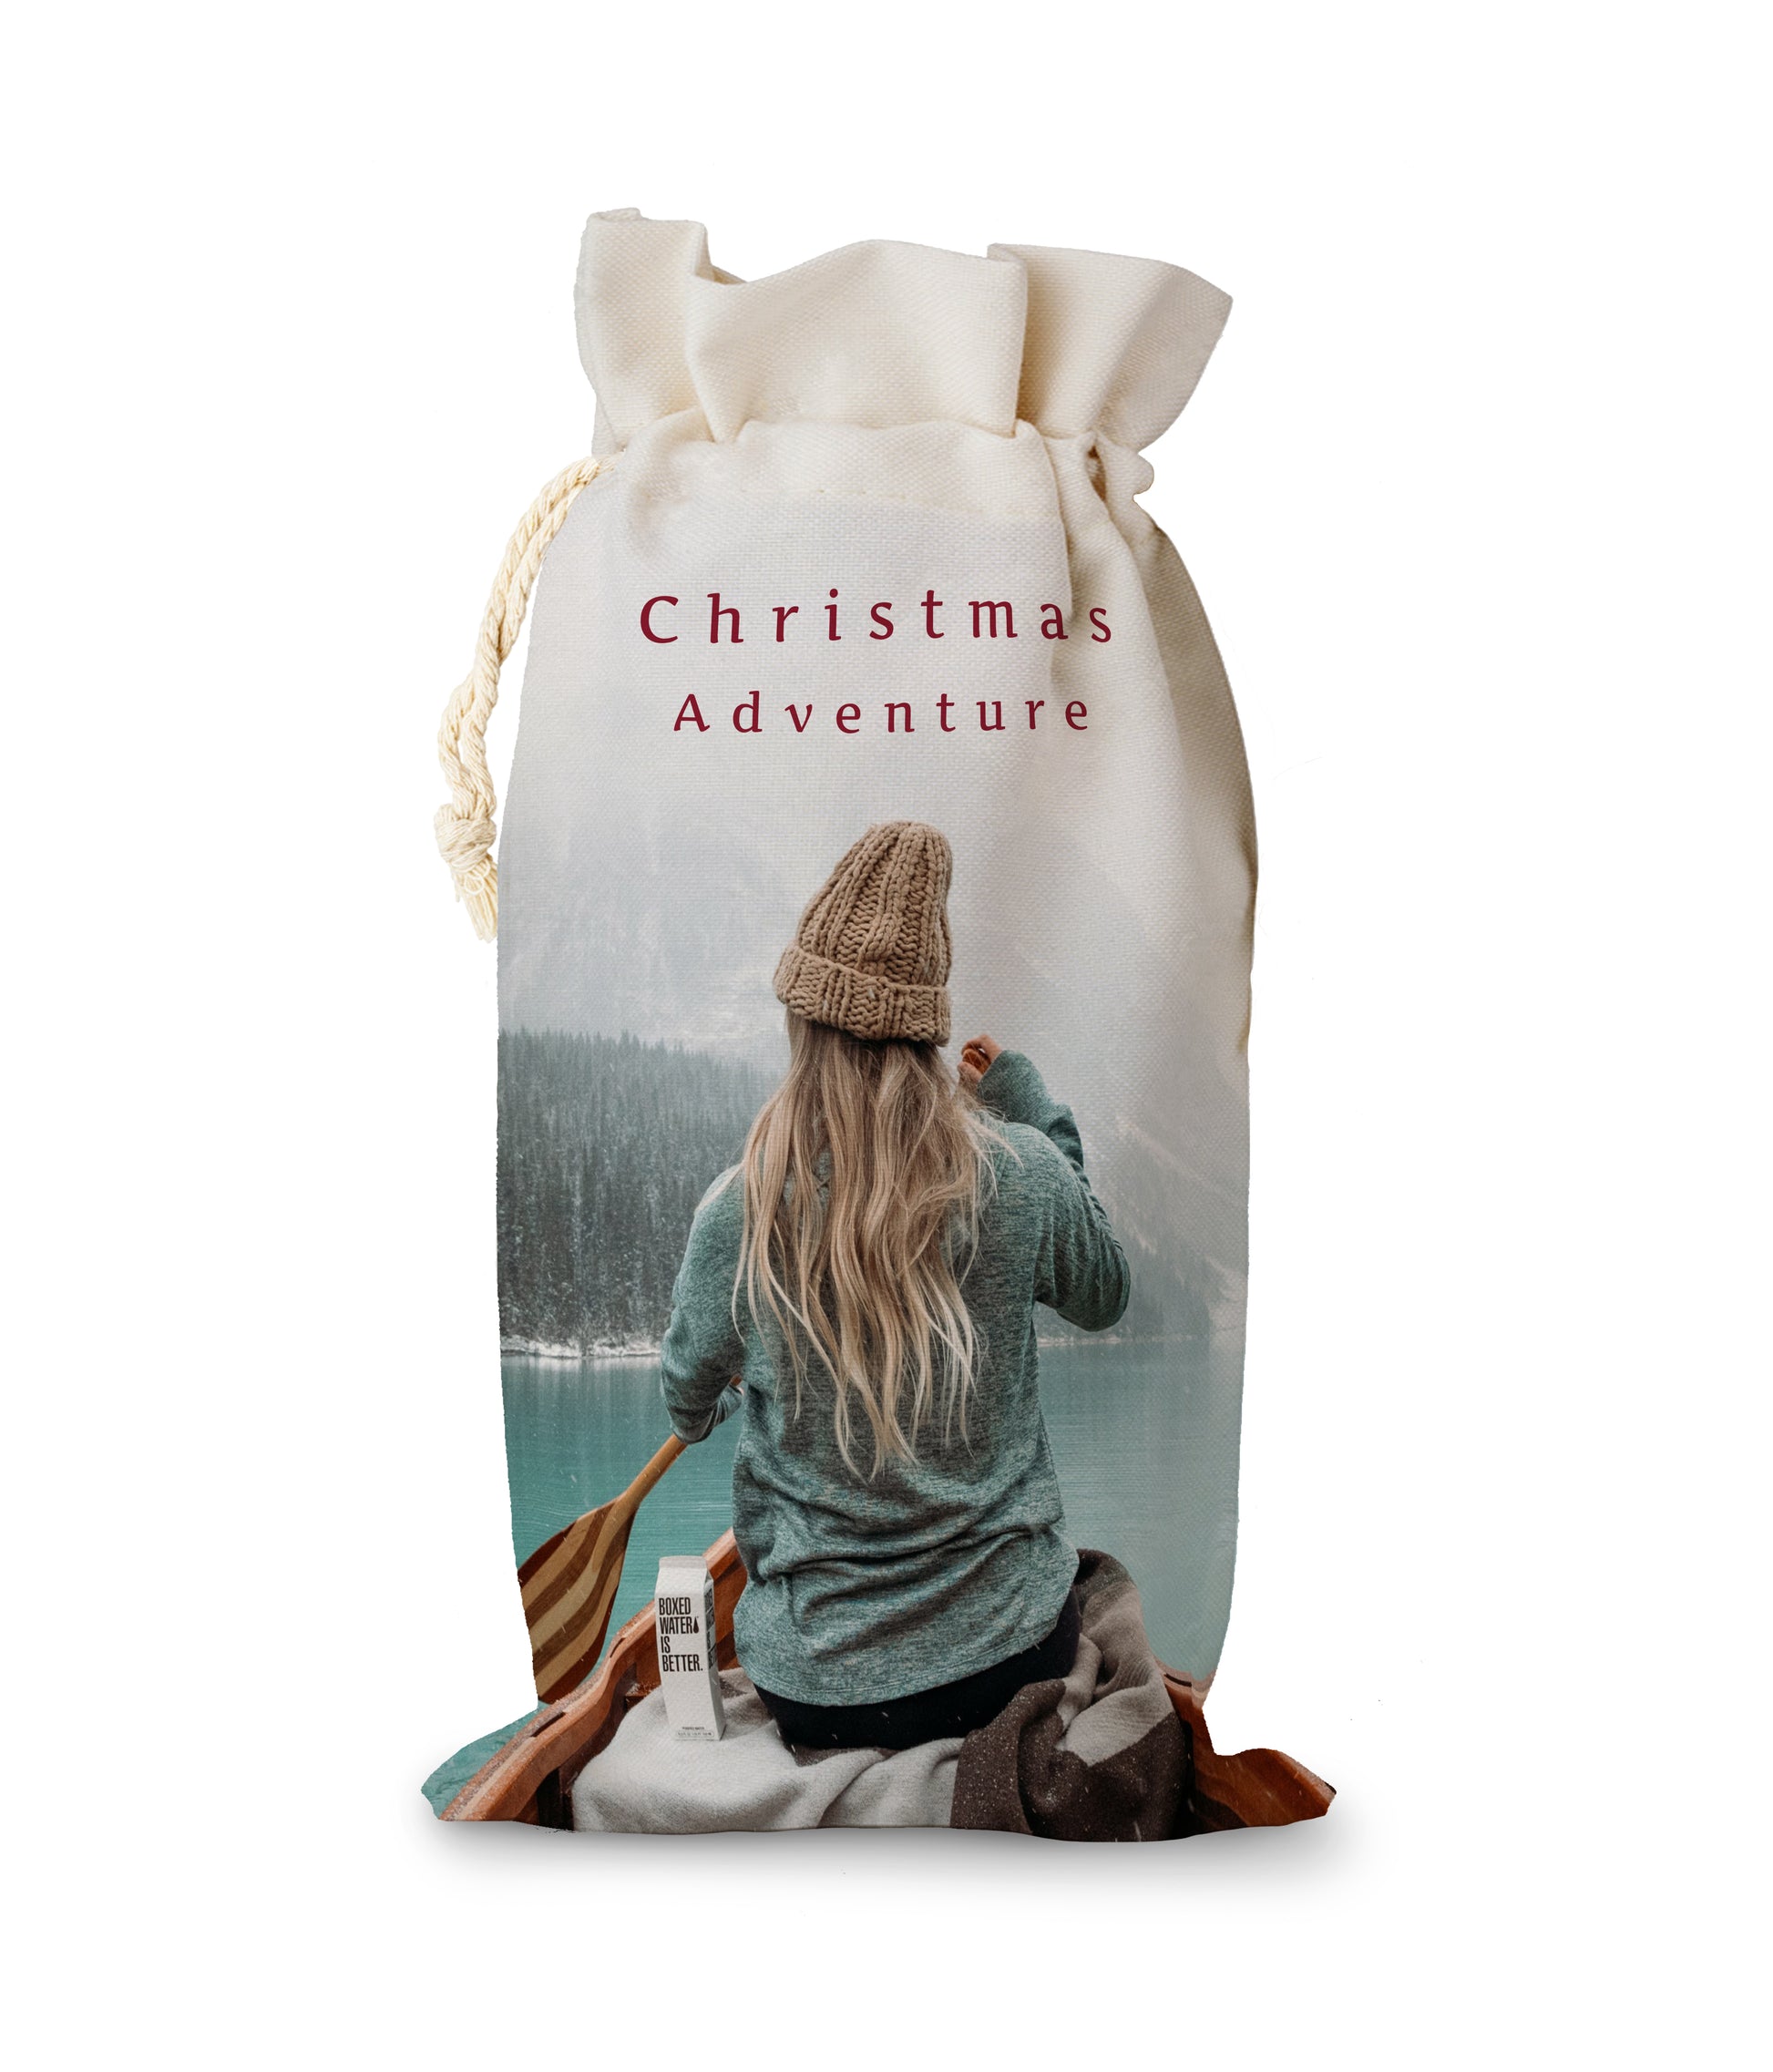 Personaslied Santa Sack with Photo and Text. "Christmas Adventure".